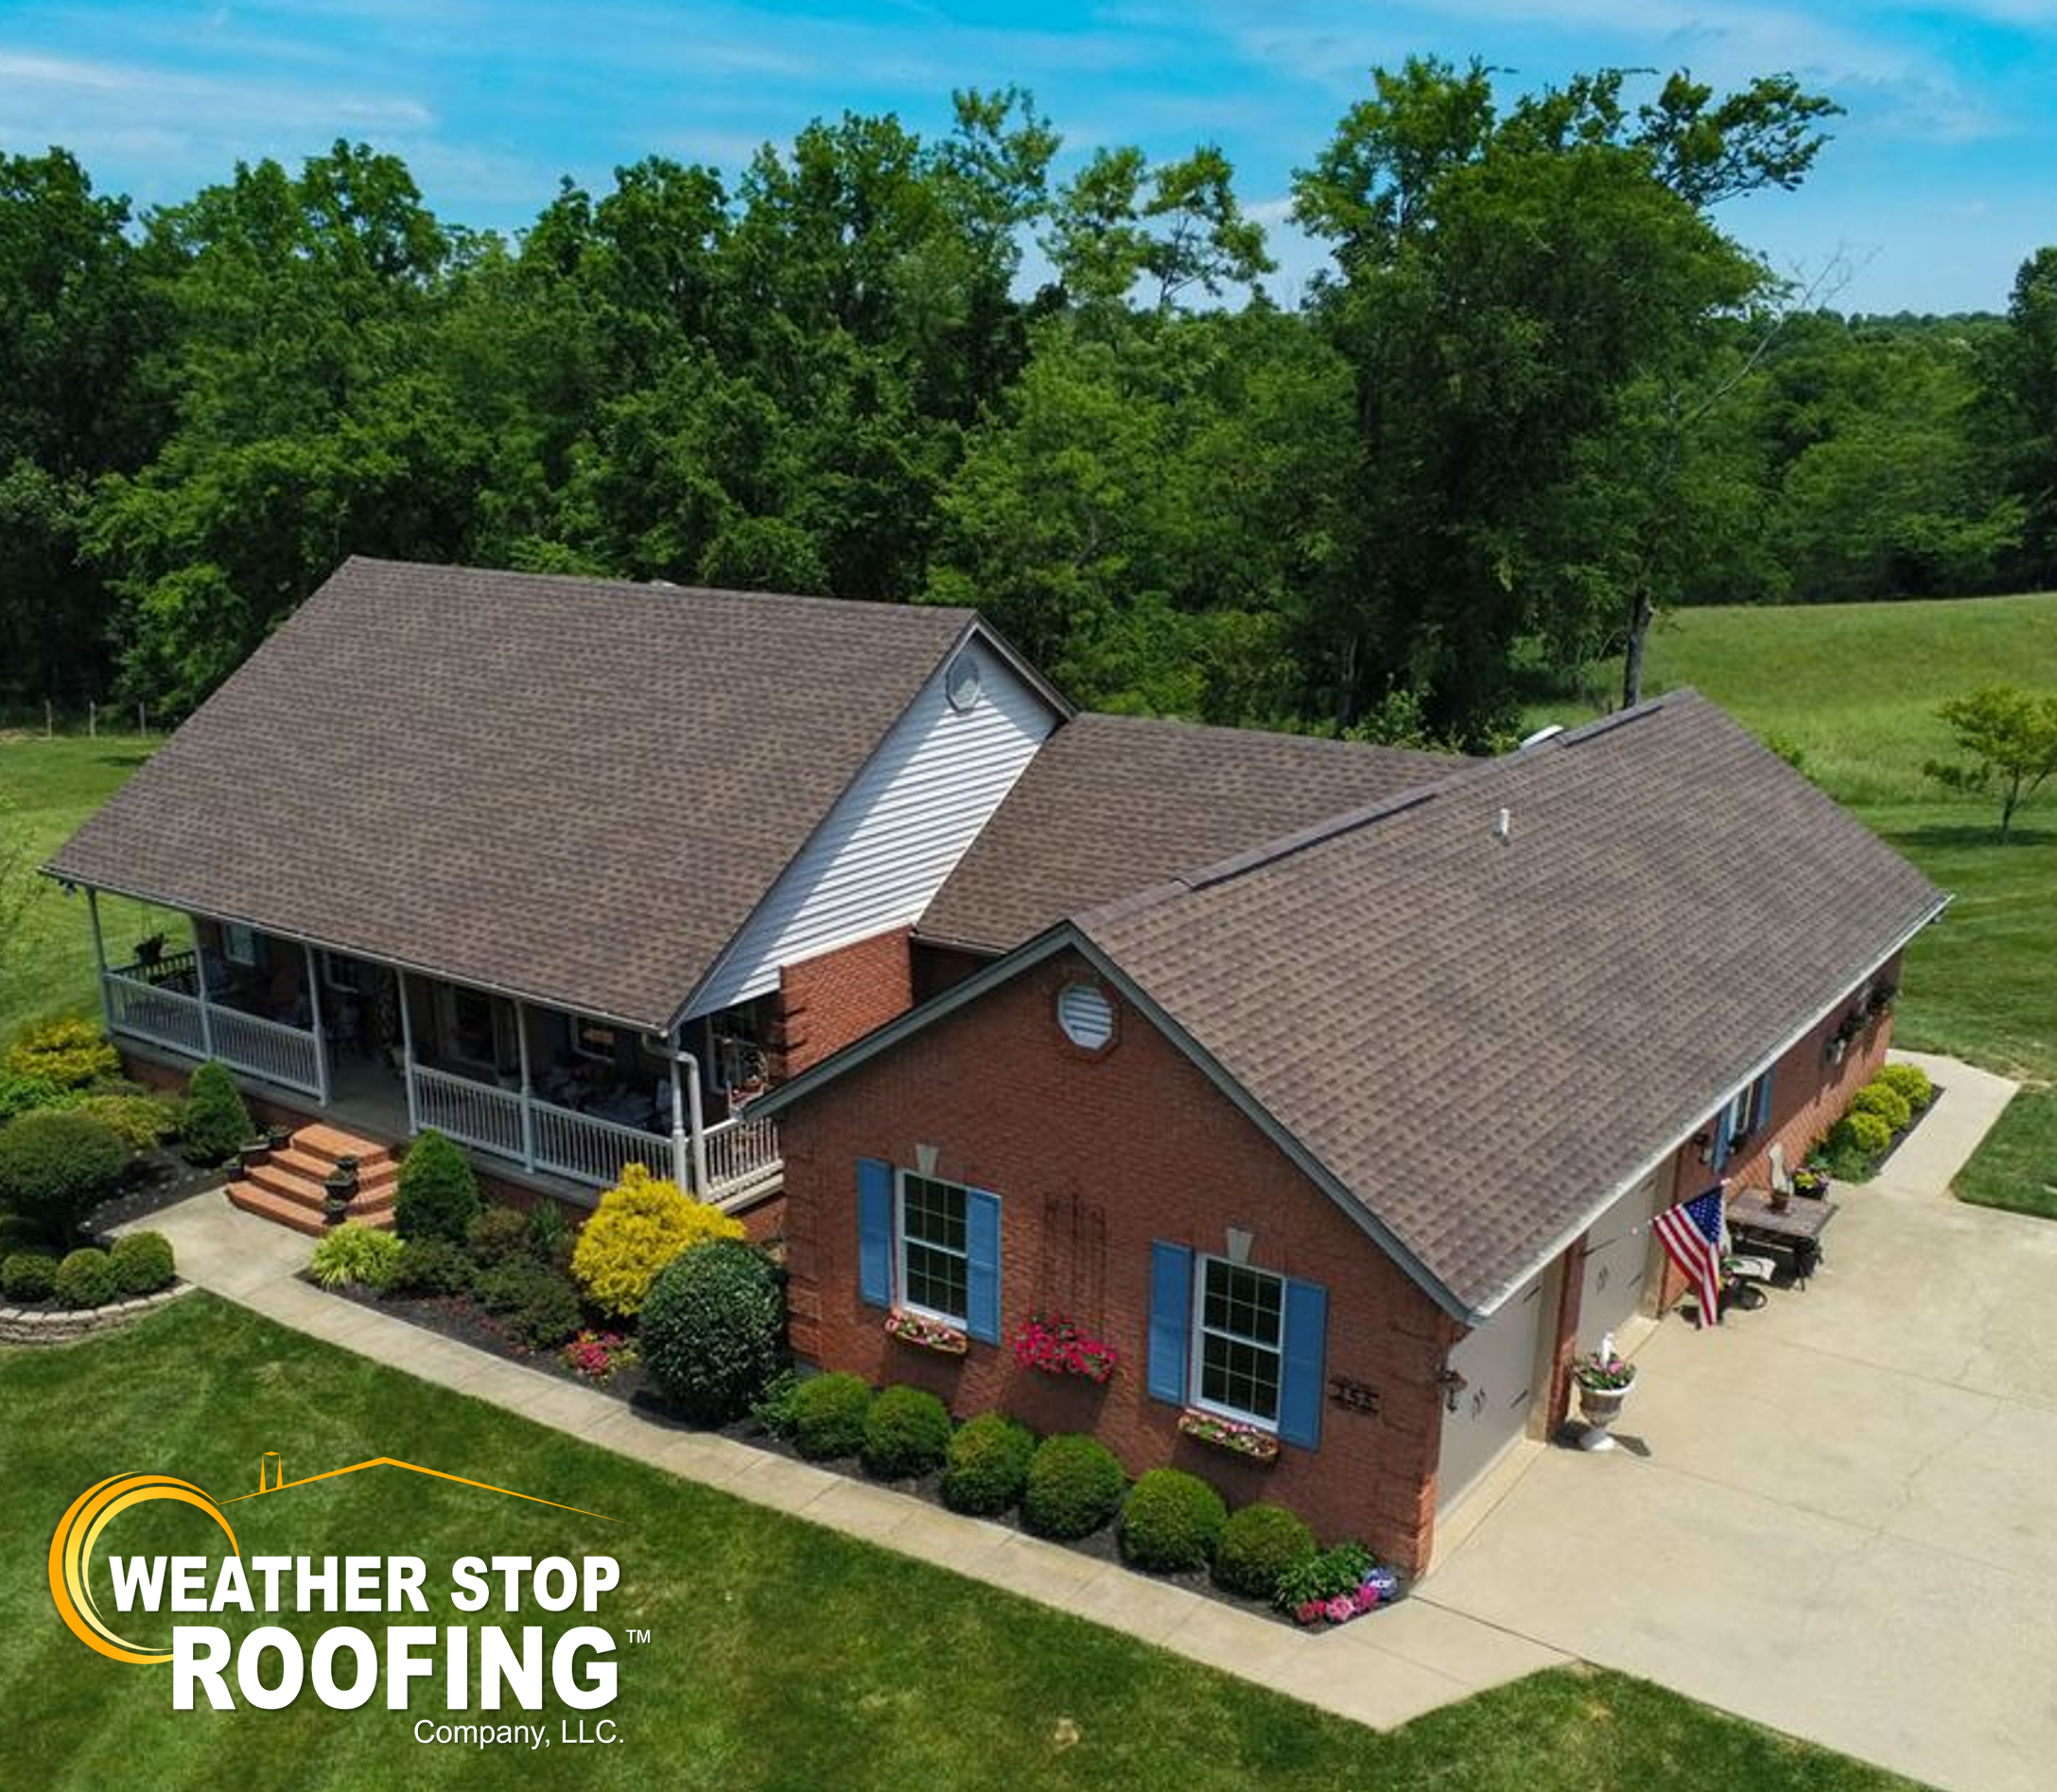 Residential Home - Weather Stop Roofing™ Logo